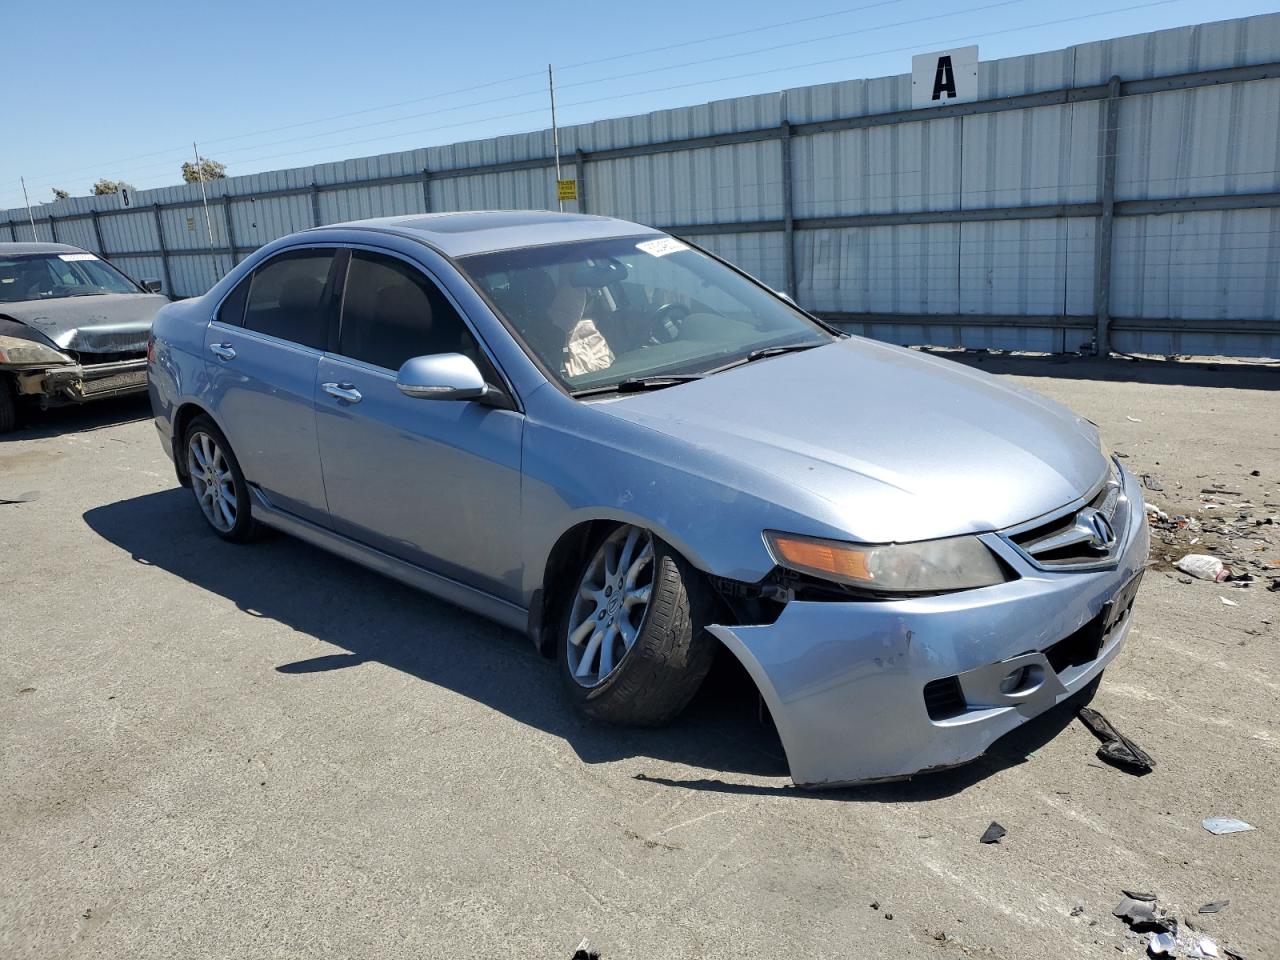 JH4CL96996C017237 2006 Acura TSX at CA - Martinez, Copart lot 